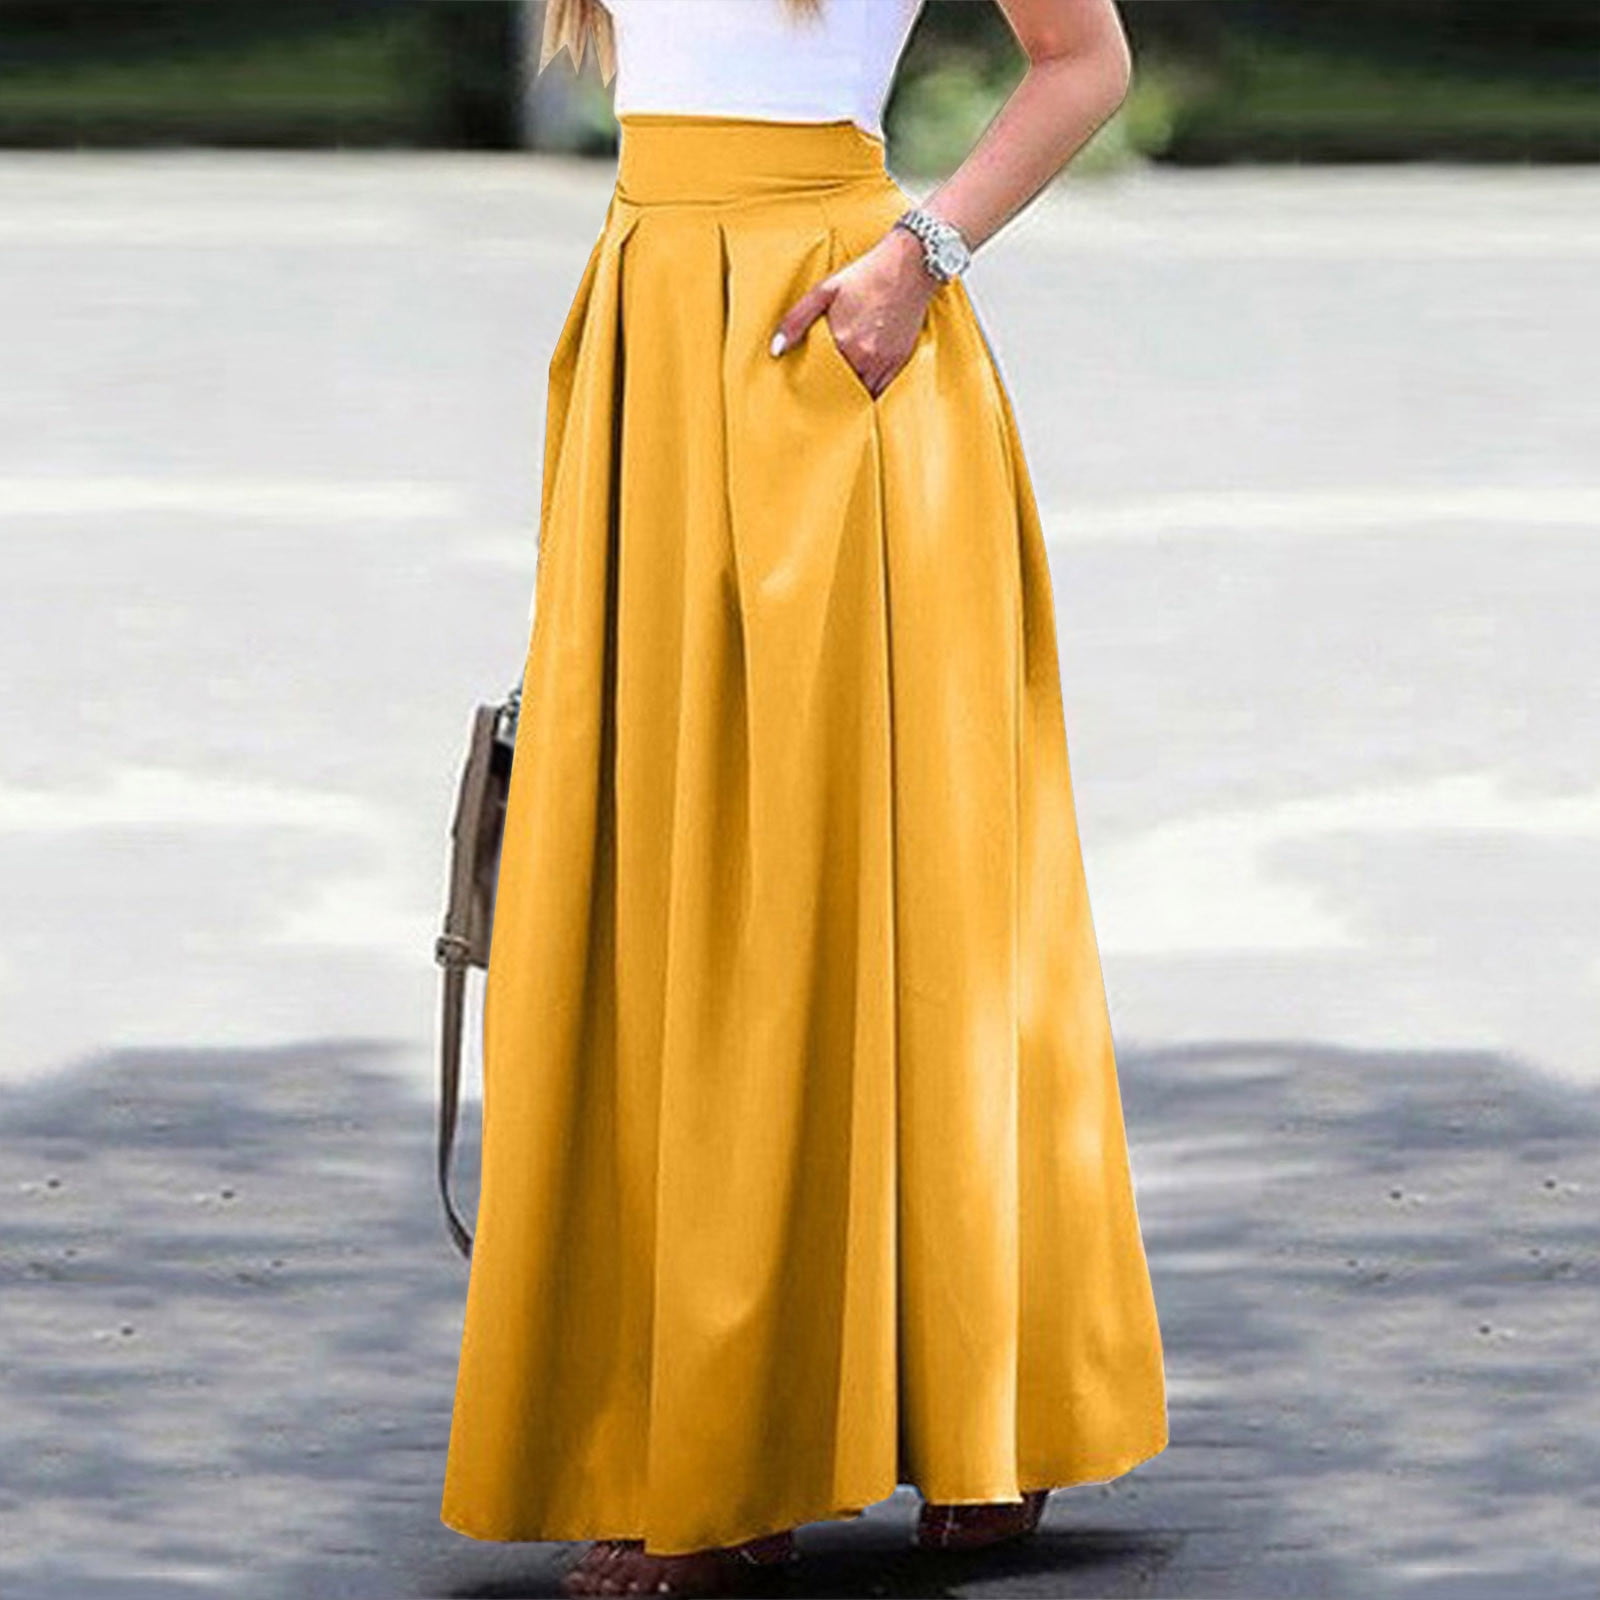 GERsome Women s Pleated Long Skirts High Waisted A Line Swing Skirt Ankle Length Flowy Maxi Skirts with Pockets 70eb8a89 76bb 4ec1 9379 61b65aef3bf7.9cae2bf0647ff2a2b6ab3b02fcddbac1